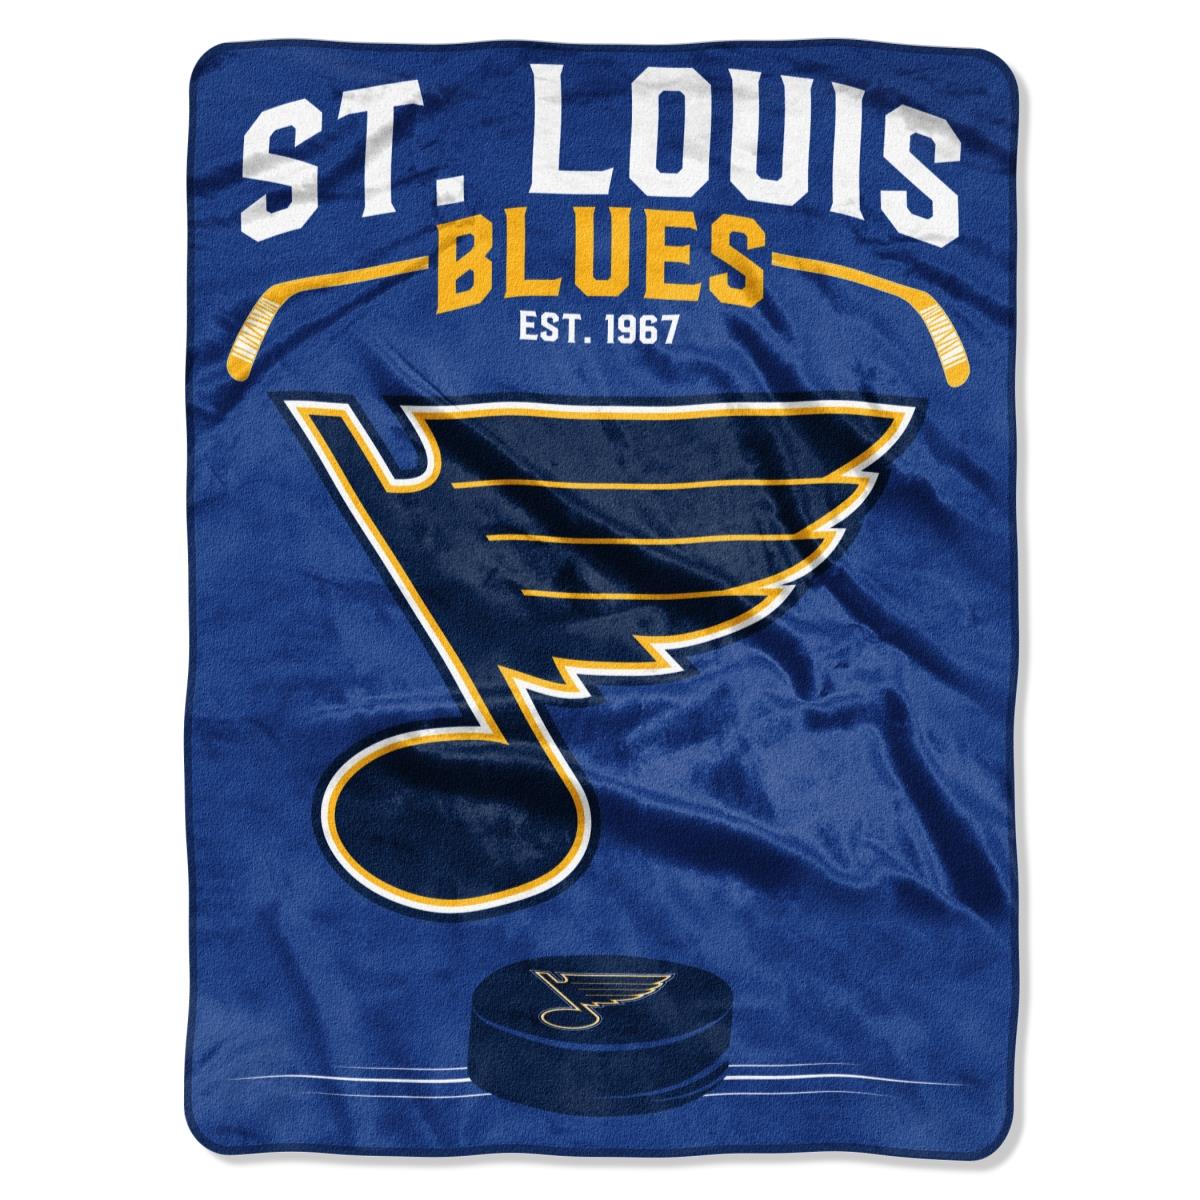 Picture of St. Louis Blues Blanket 60x80 Raschel Inspired Design Special Order